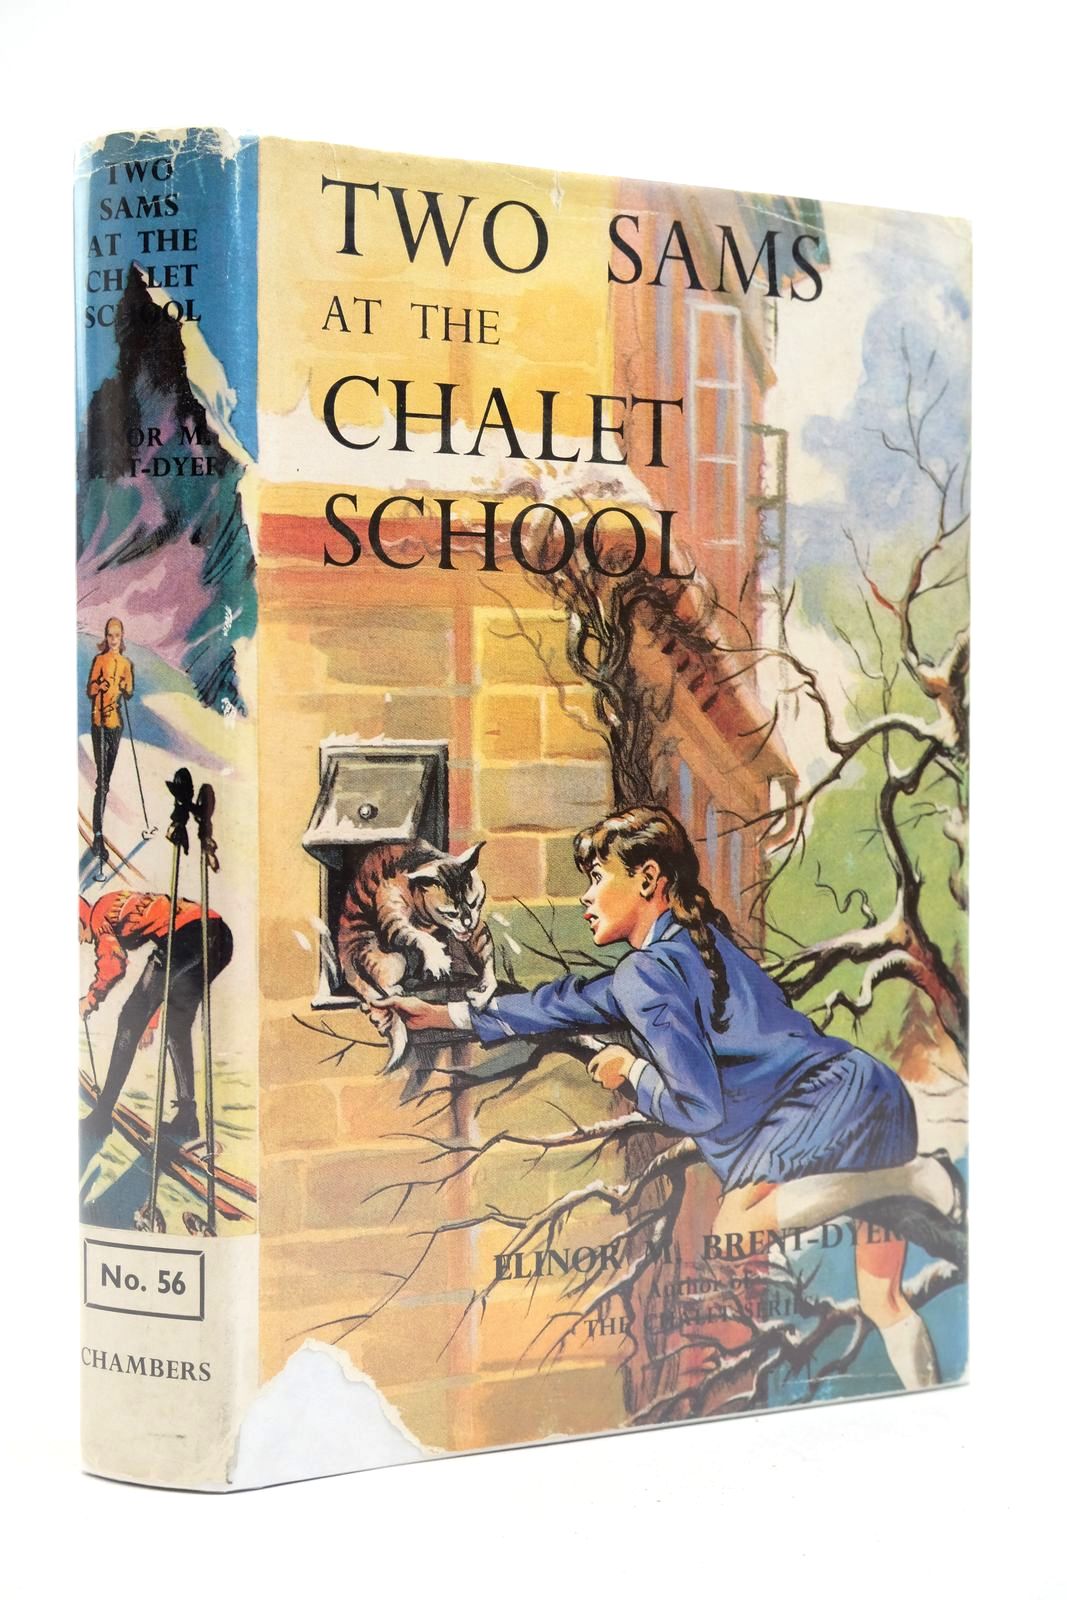 Photo of TWO SAMS AT THE CHALET SCHOOL written by Brent-Dyer, Elinor M. published by W. &amp; R. Chambers Limited (STOCK CODE: 2140160)  for sale by Stella & Rose's Books